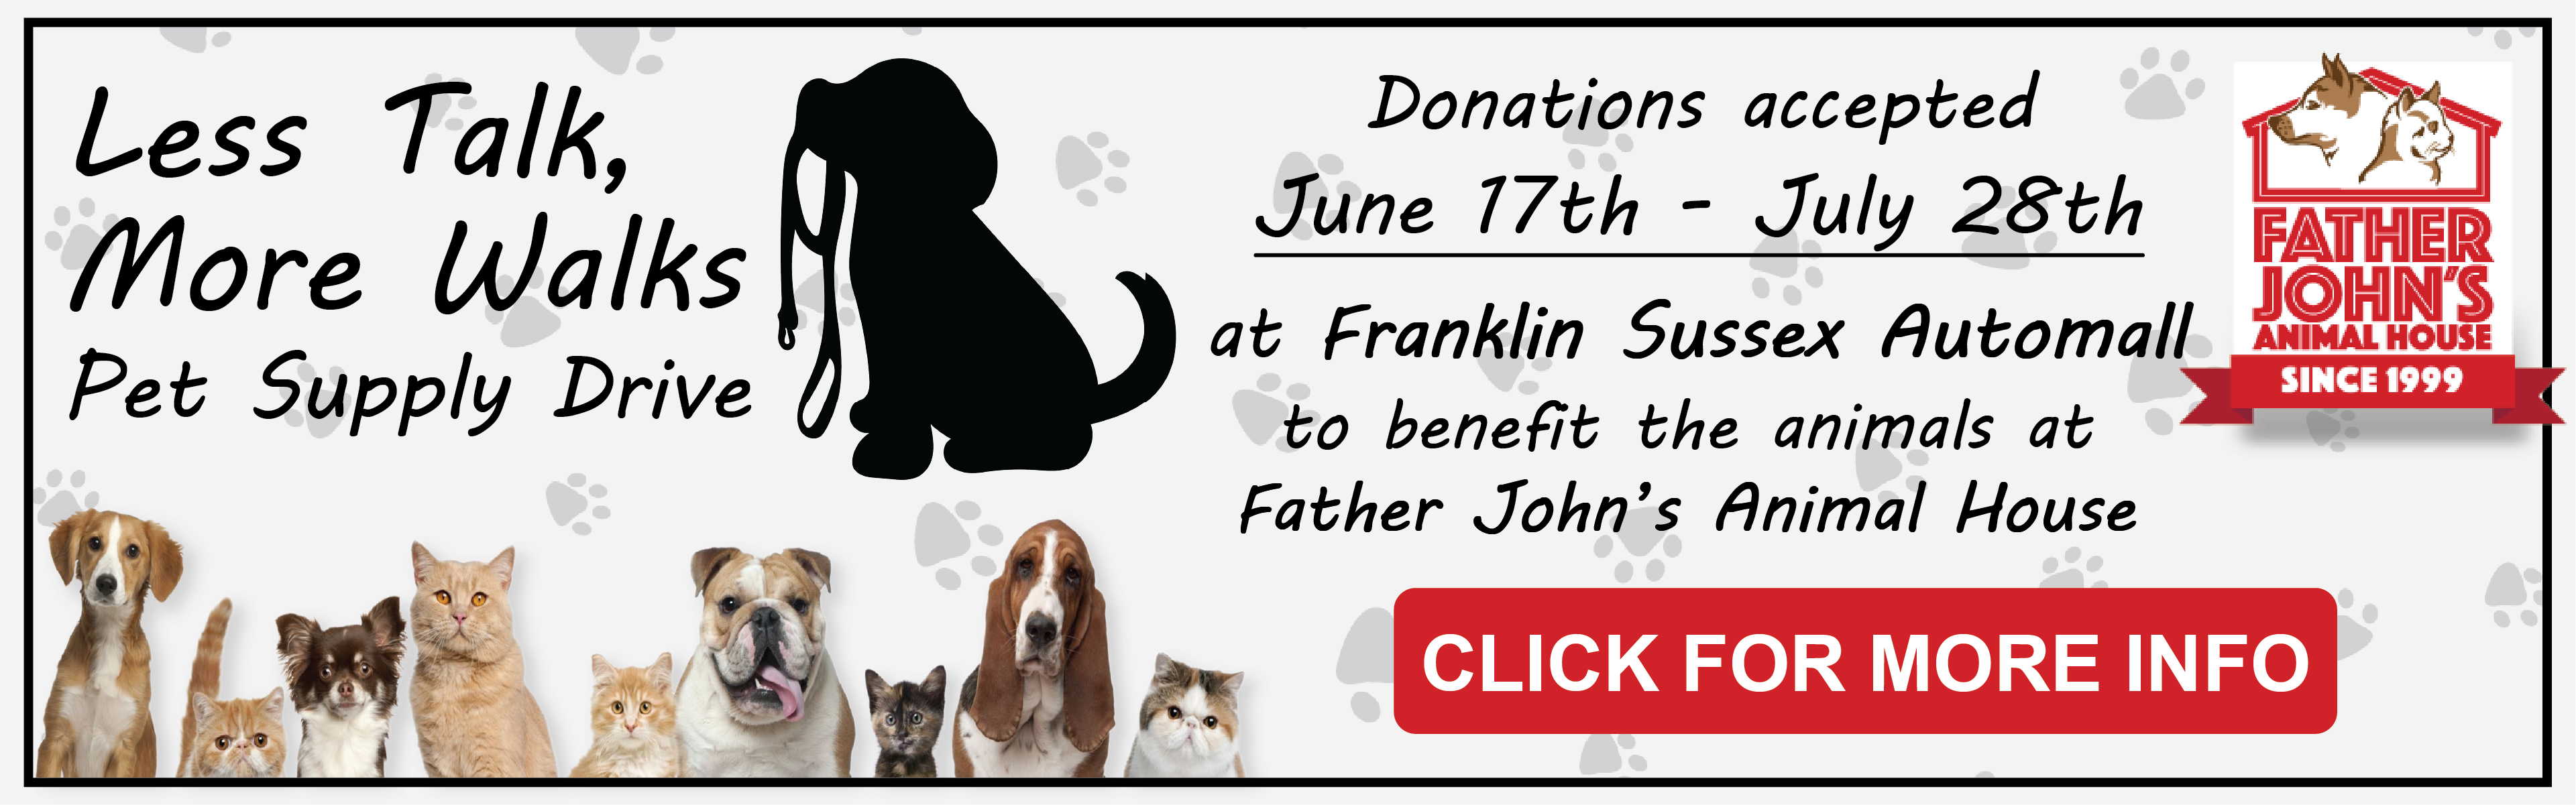 Less Talk, More Walks Pet Supply Drive | Donations accepted June 17th - July 28th at Franklin Sussex Automall to benefit the animals at Father John's Animal House | Click for more info